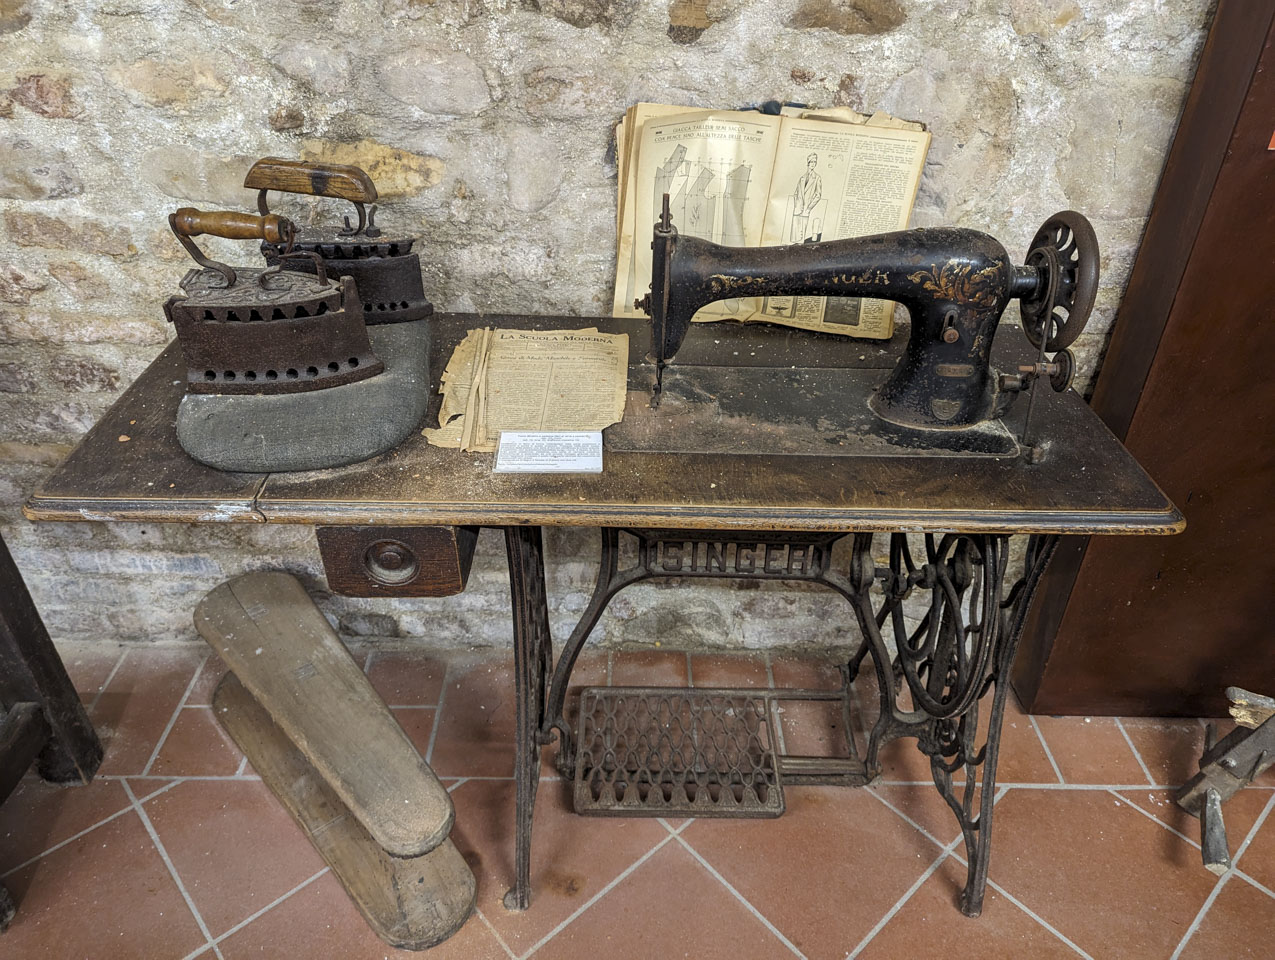 Antique sewing machine and accompanying items.